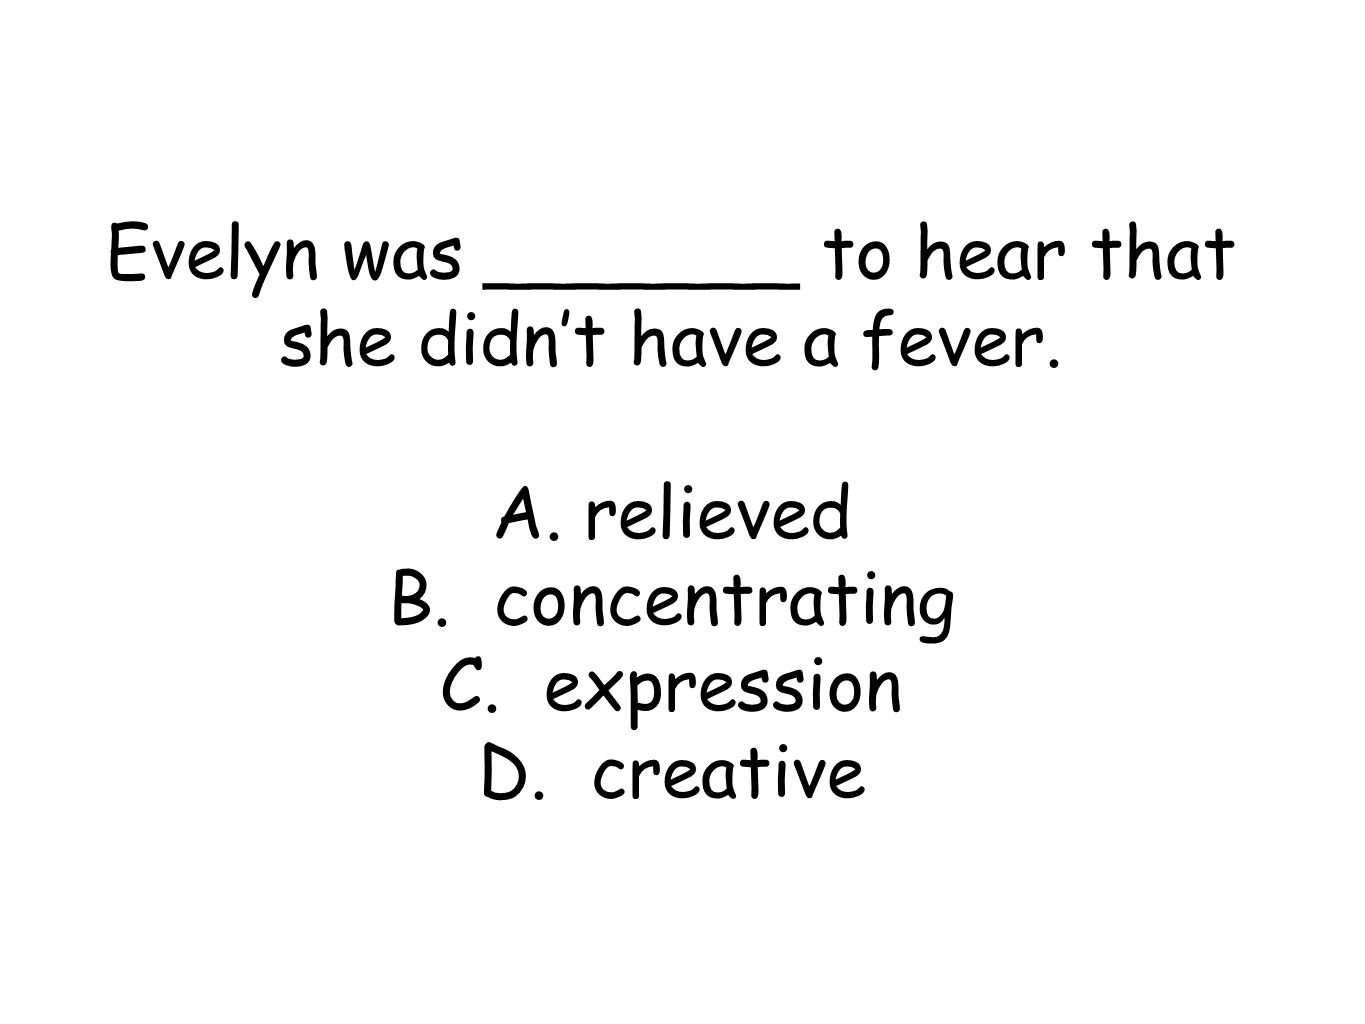 Evelyn was _______ to hear that she didn’t have a fever.